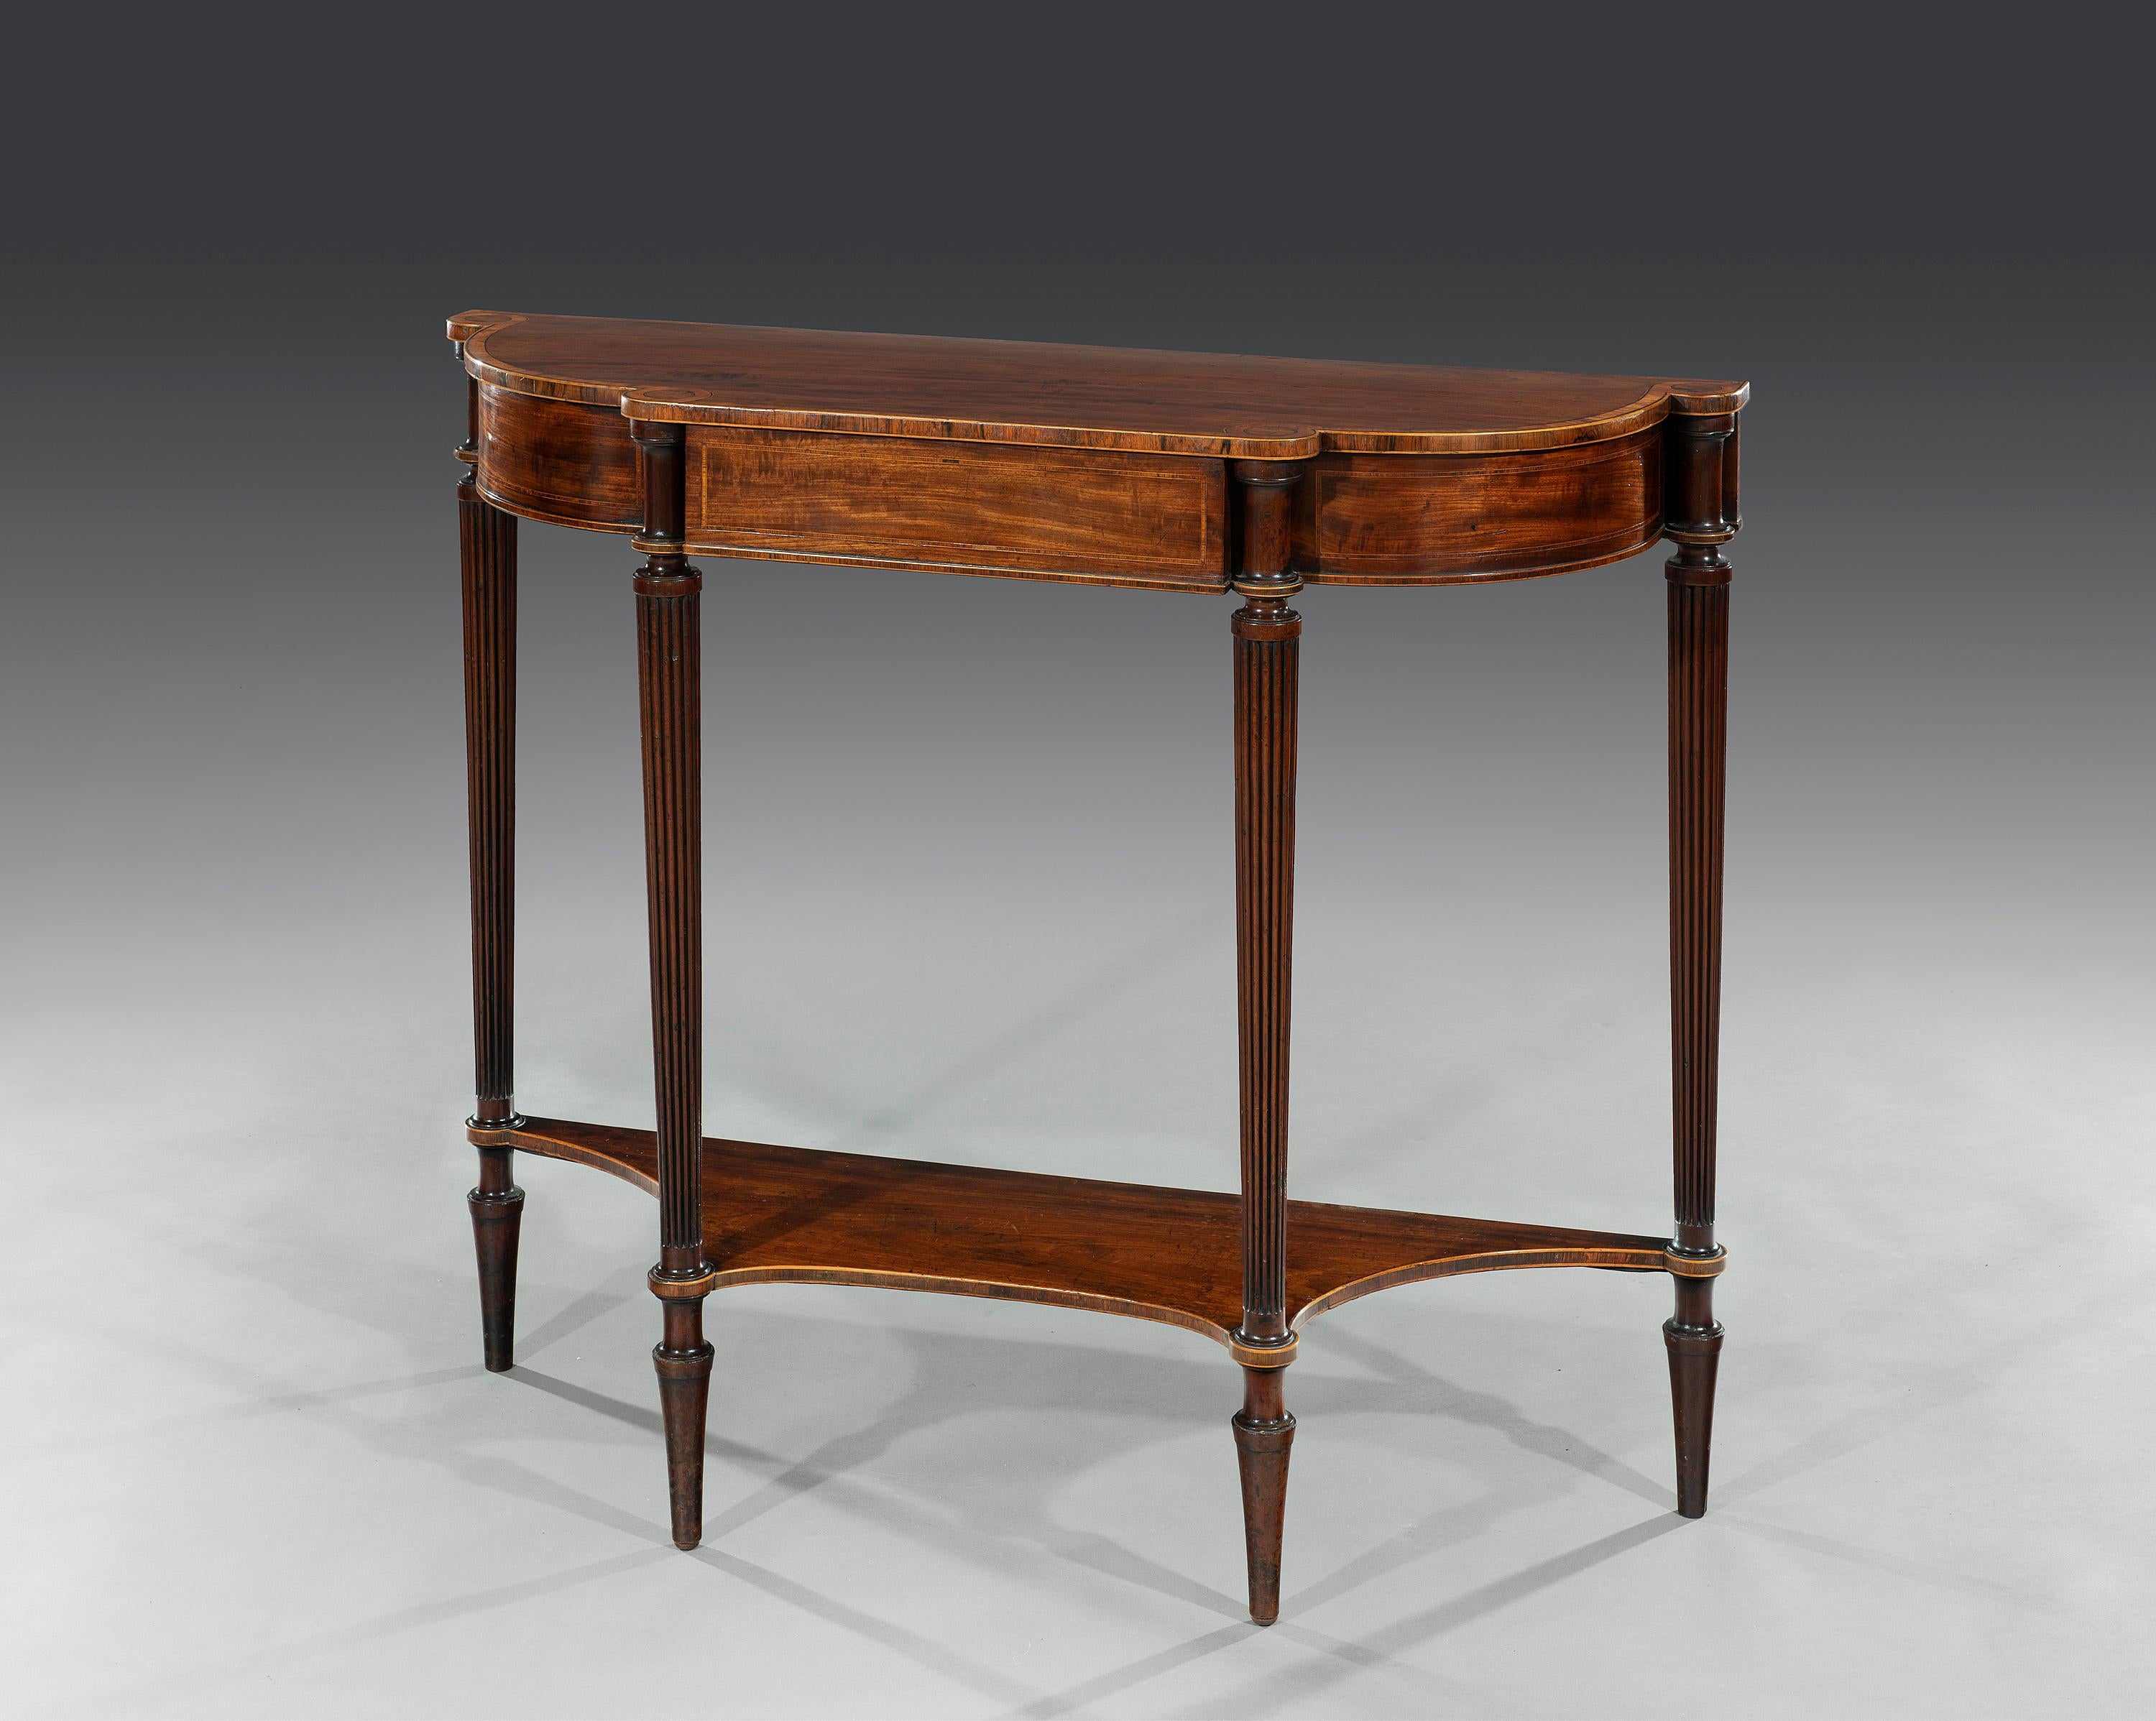 English 18th Century Period Mahogany & Rosewood Crossbanded Demilune Pier Table